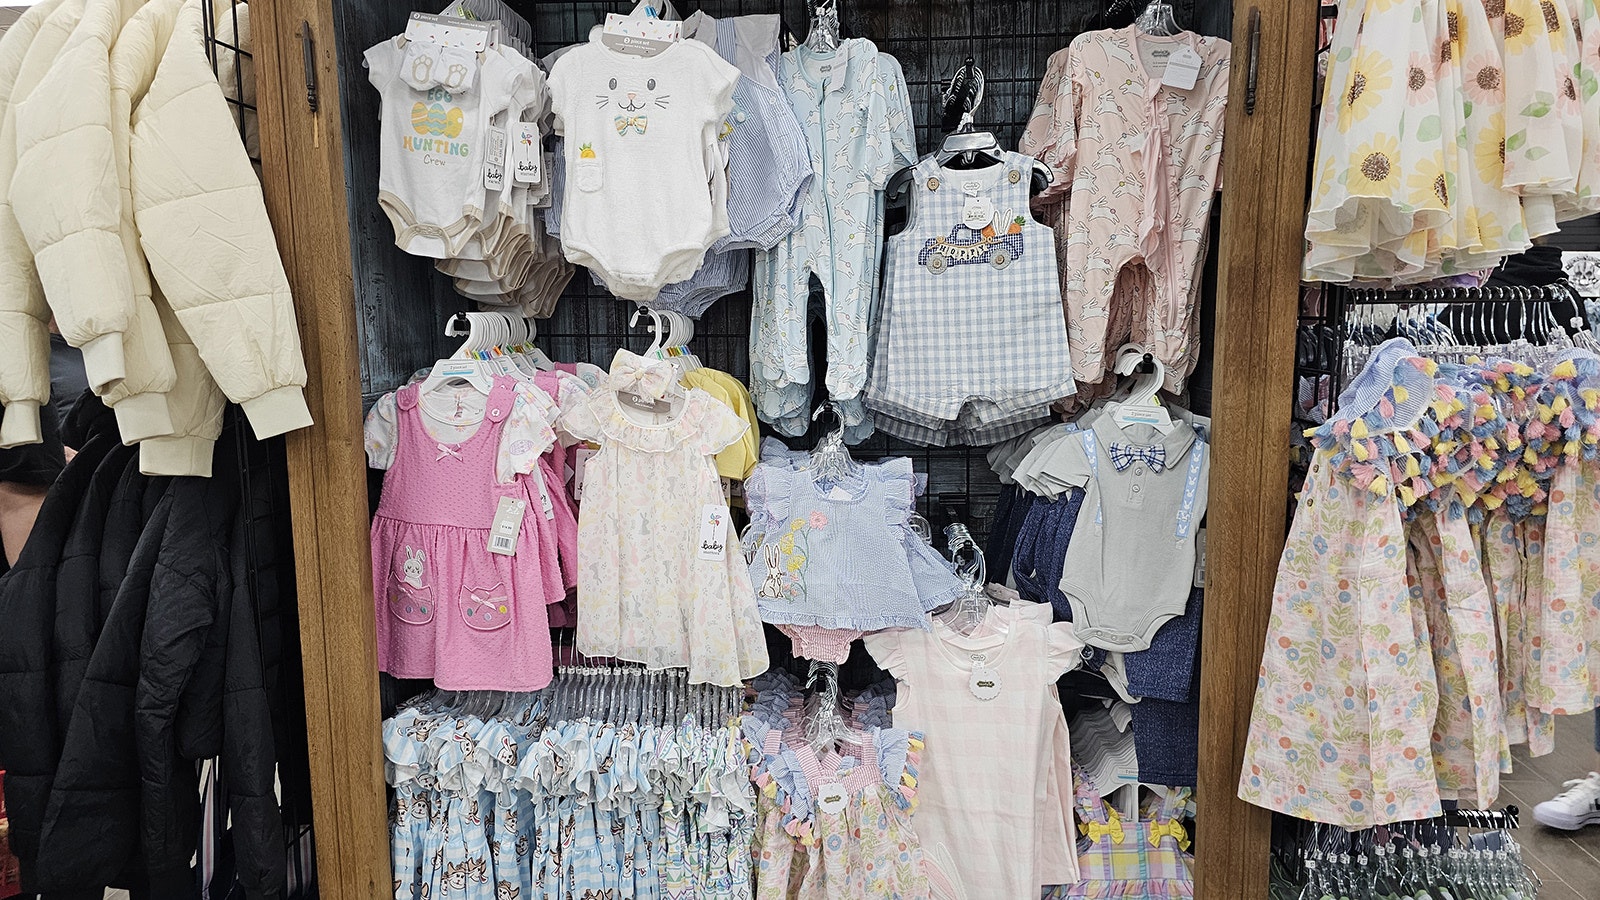 The store sells a range of children's and adult clothing.